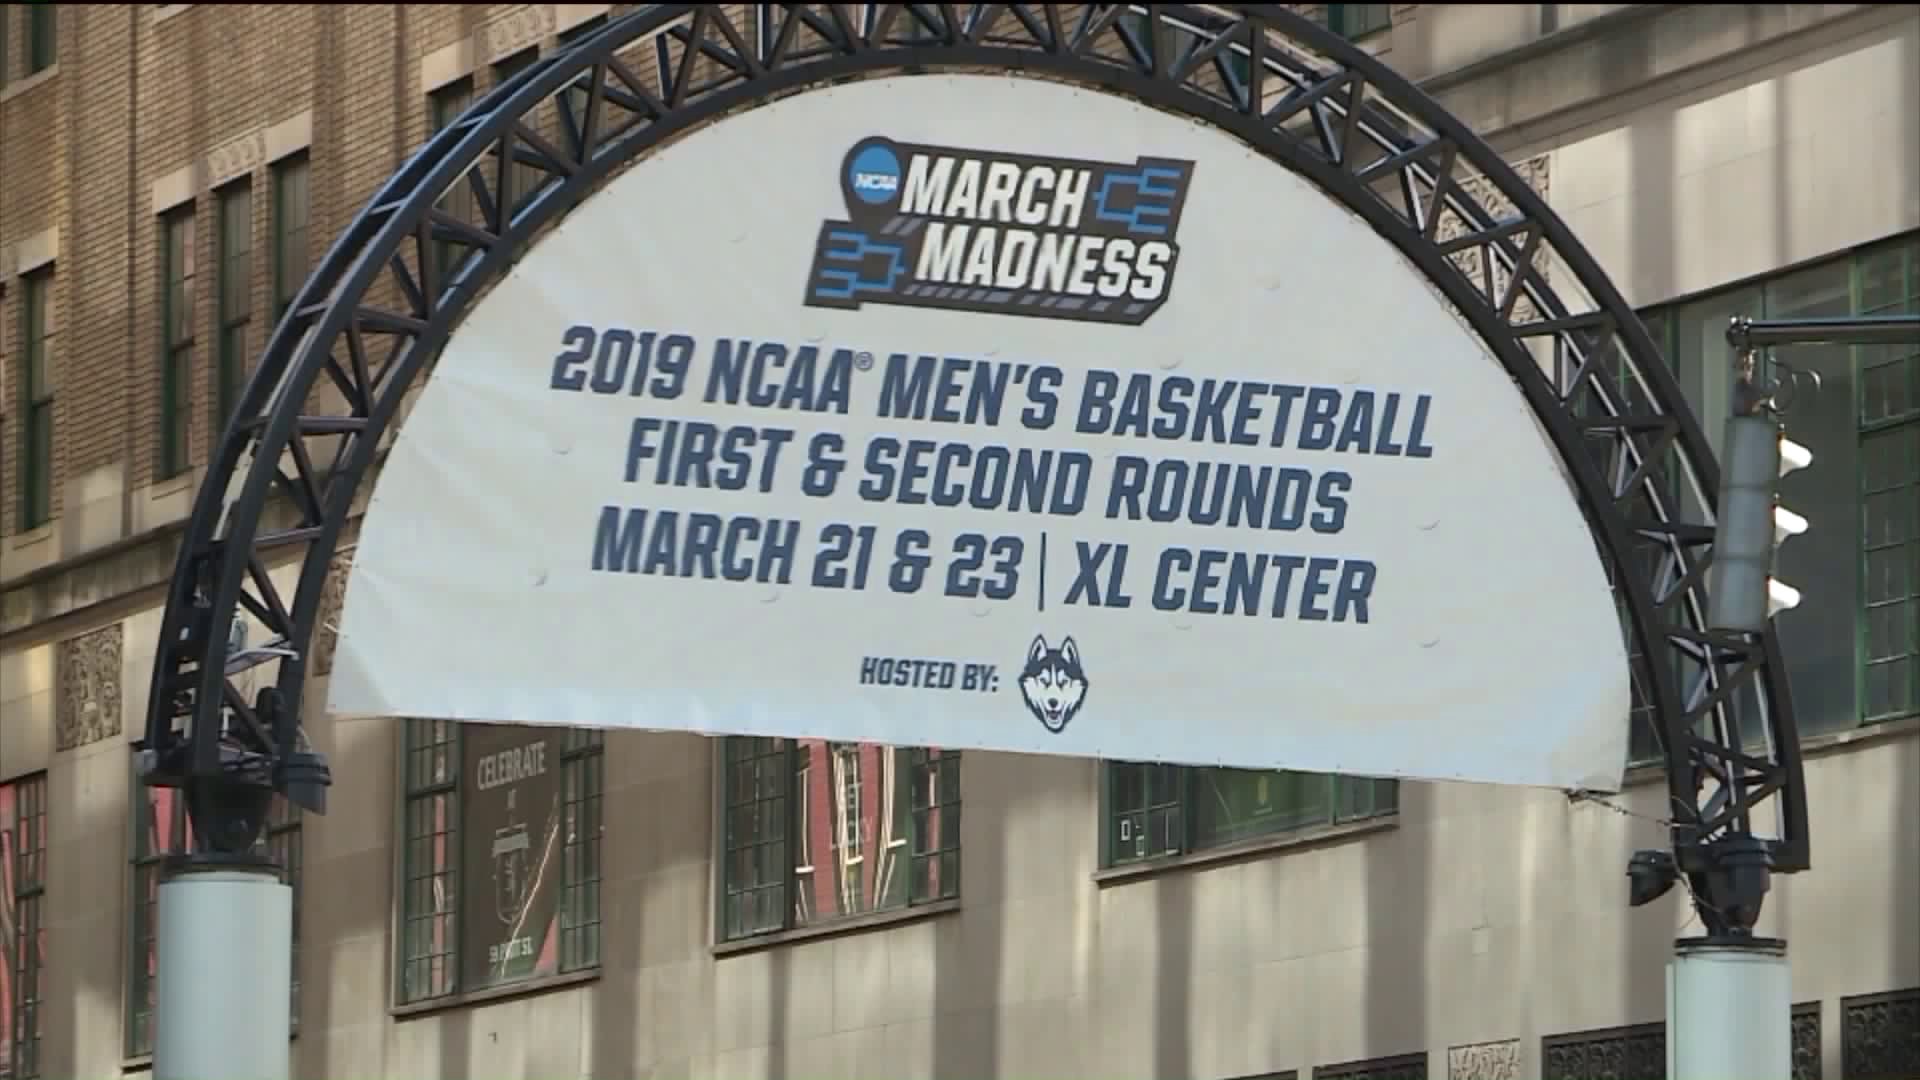 March Madness is Hartford